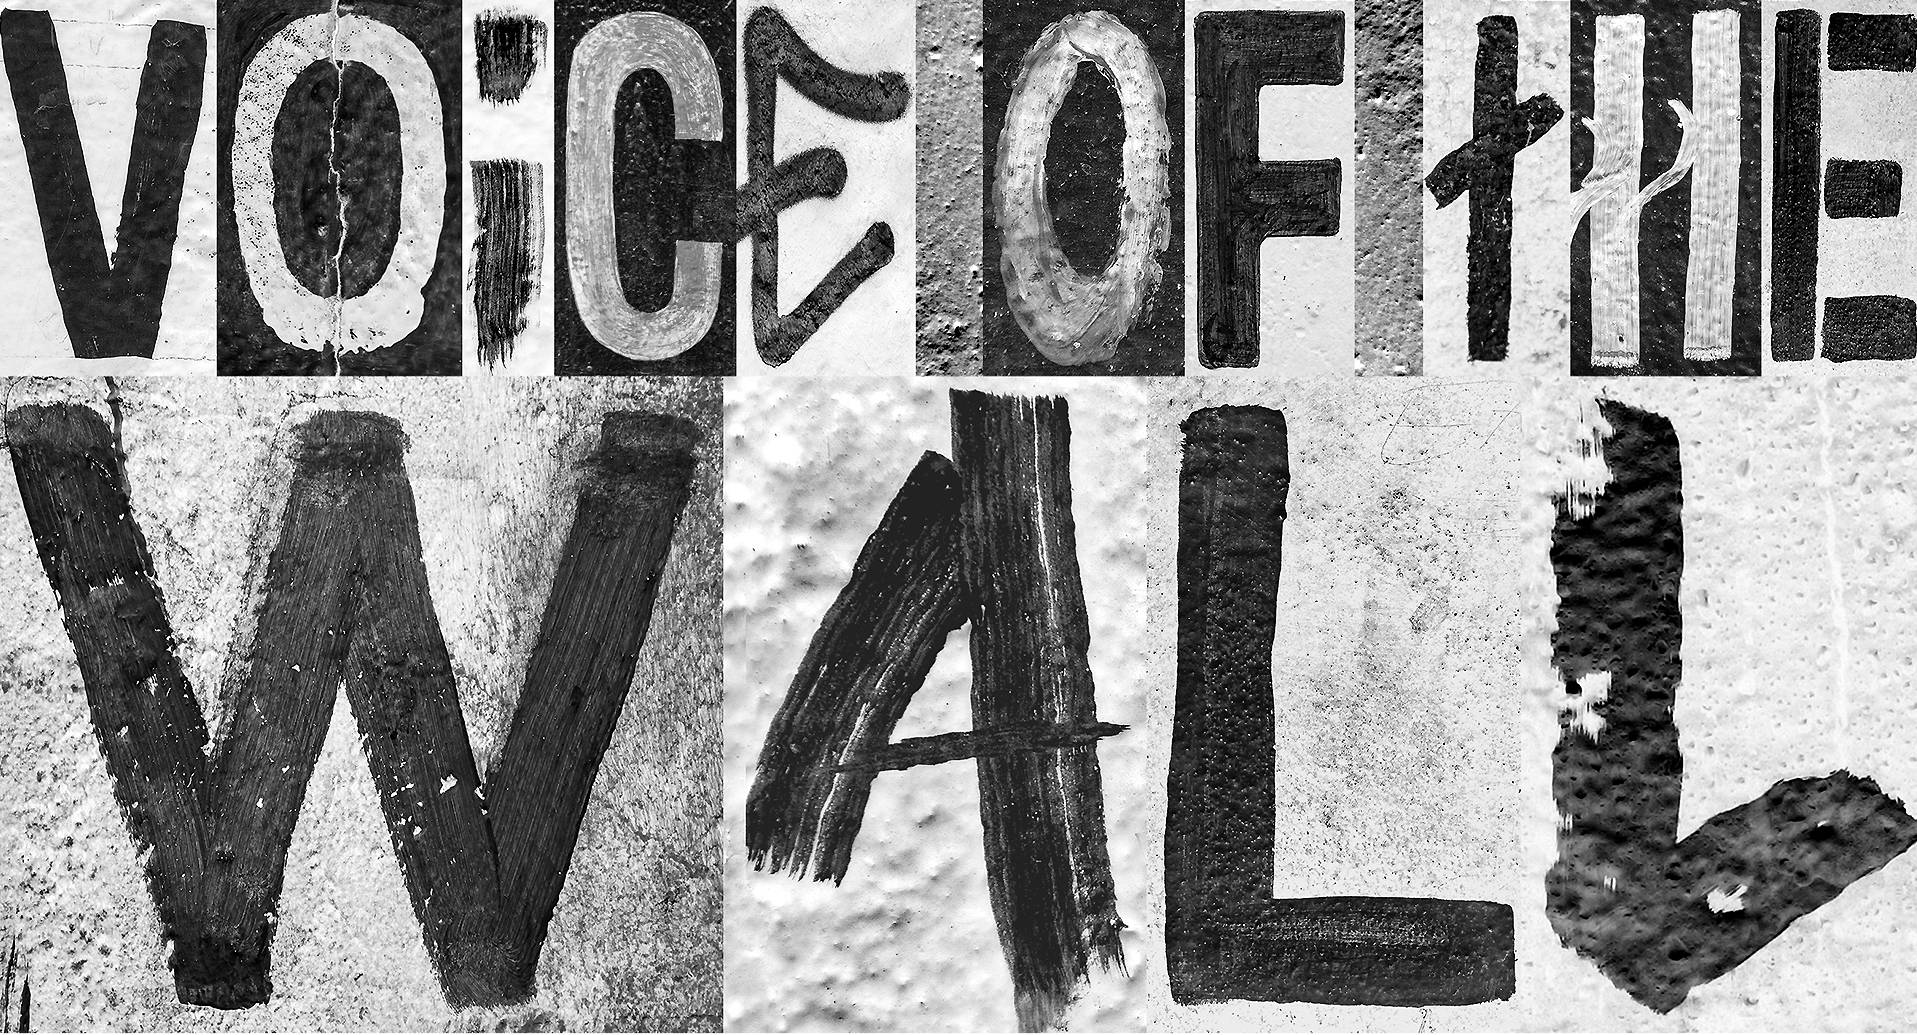 Voice of the wall - Your message of freedom